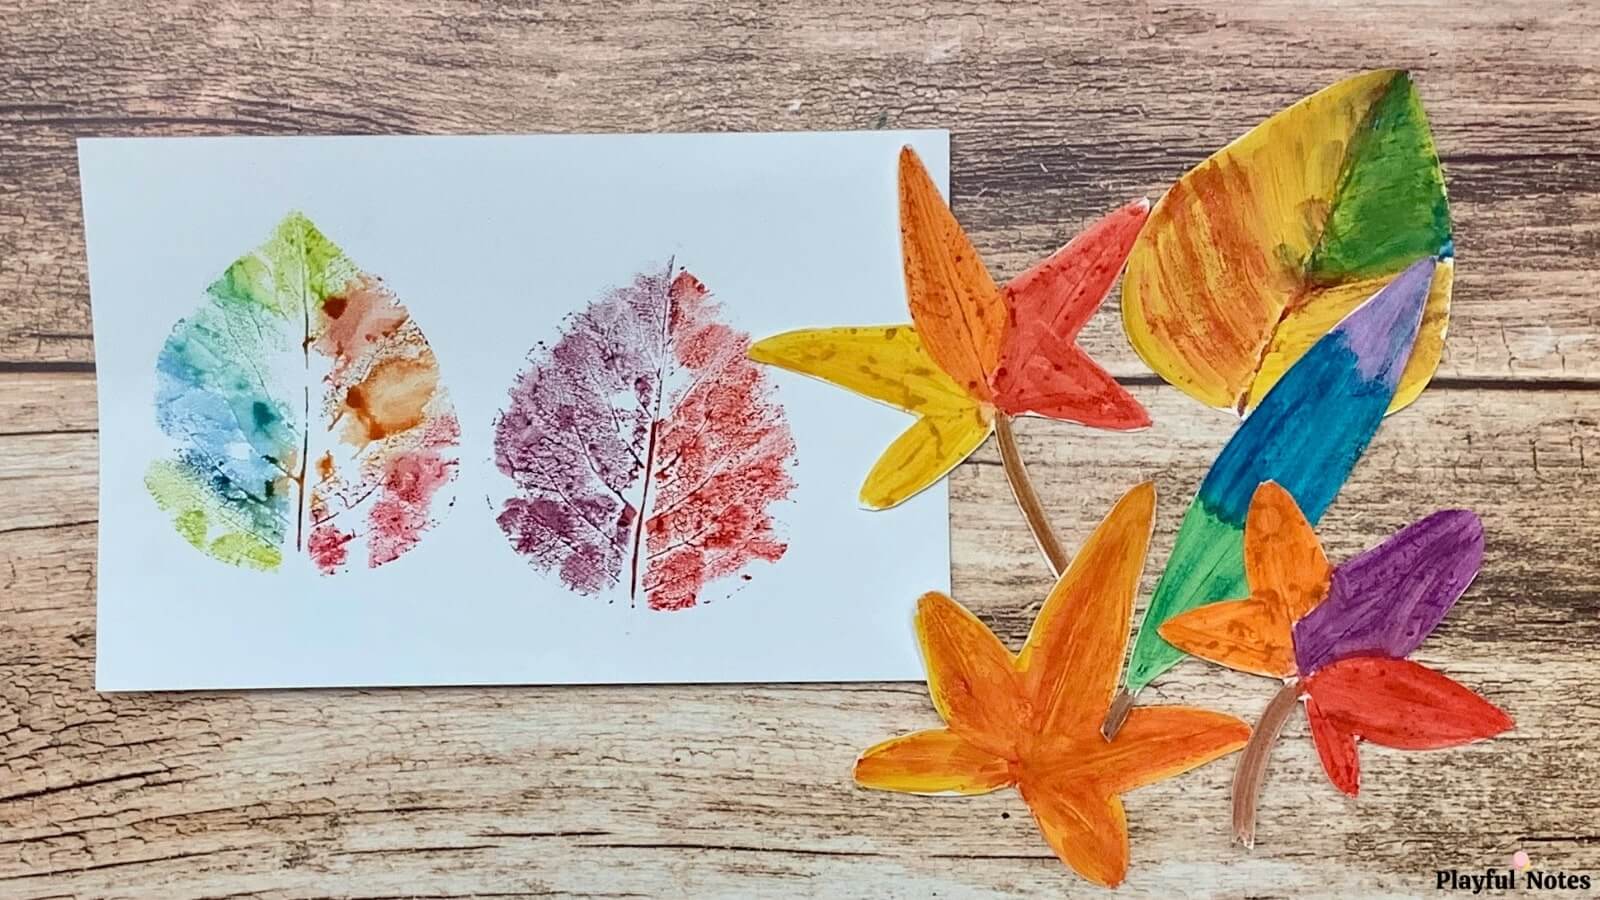 Creative Fall Leaf Watercolor Painting Technique For KidsWatercolor Leaf Painting Art Ideas 